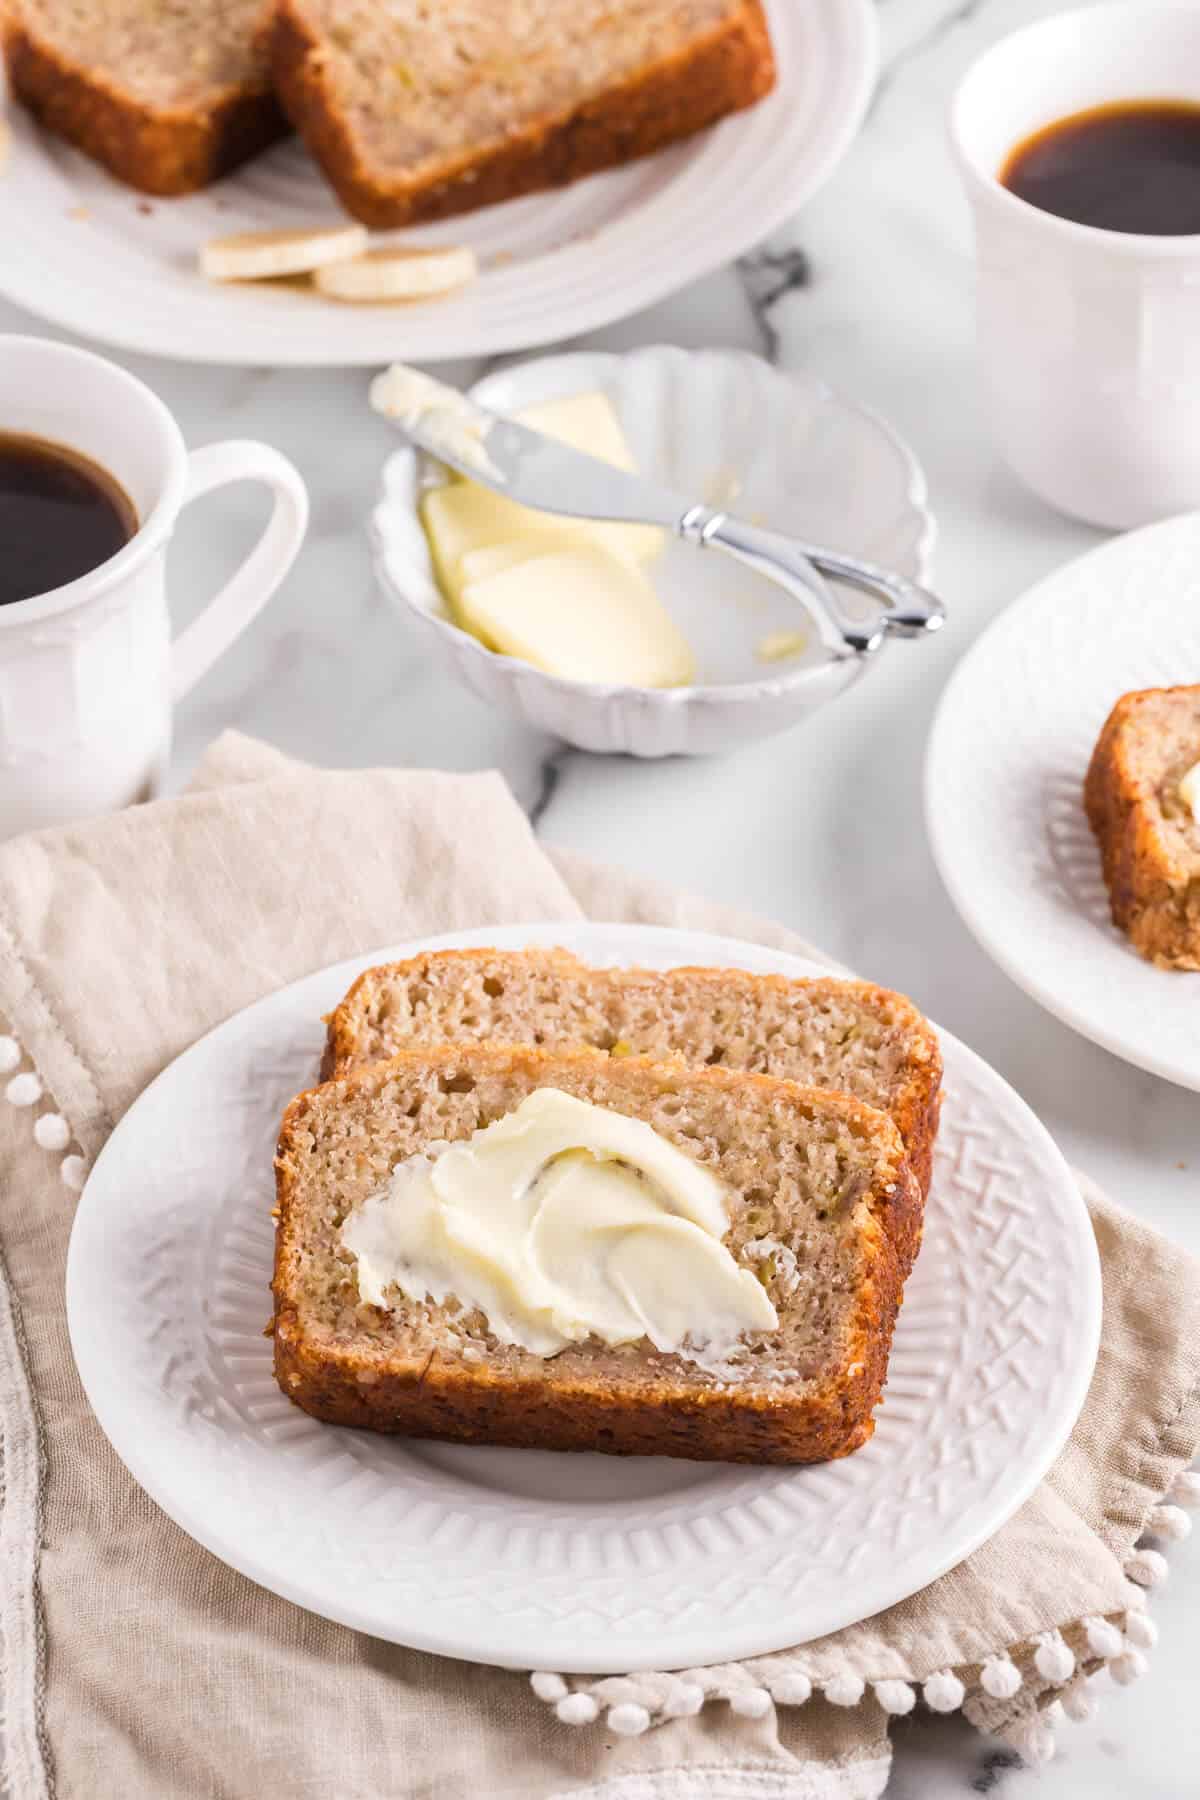 Two slices of banana bread on a plate surrounded by other plates of banana bread, a dish of butter, and cup of coffee.